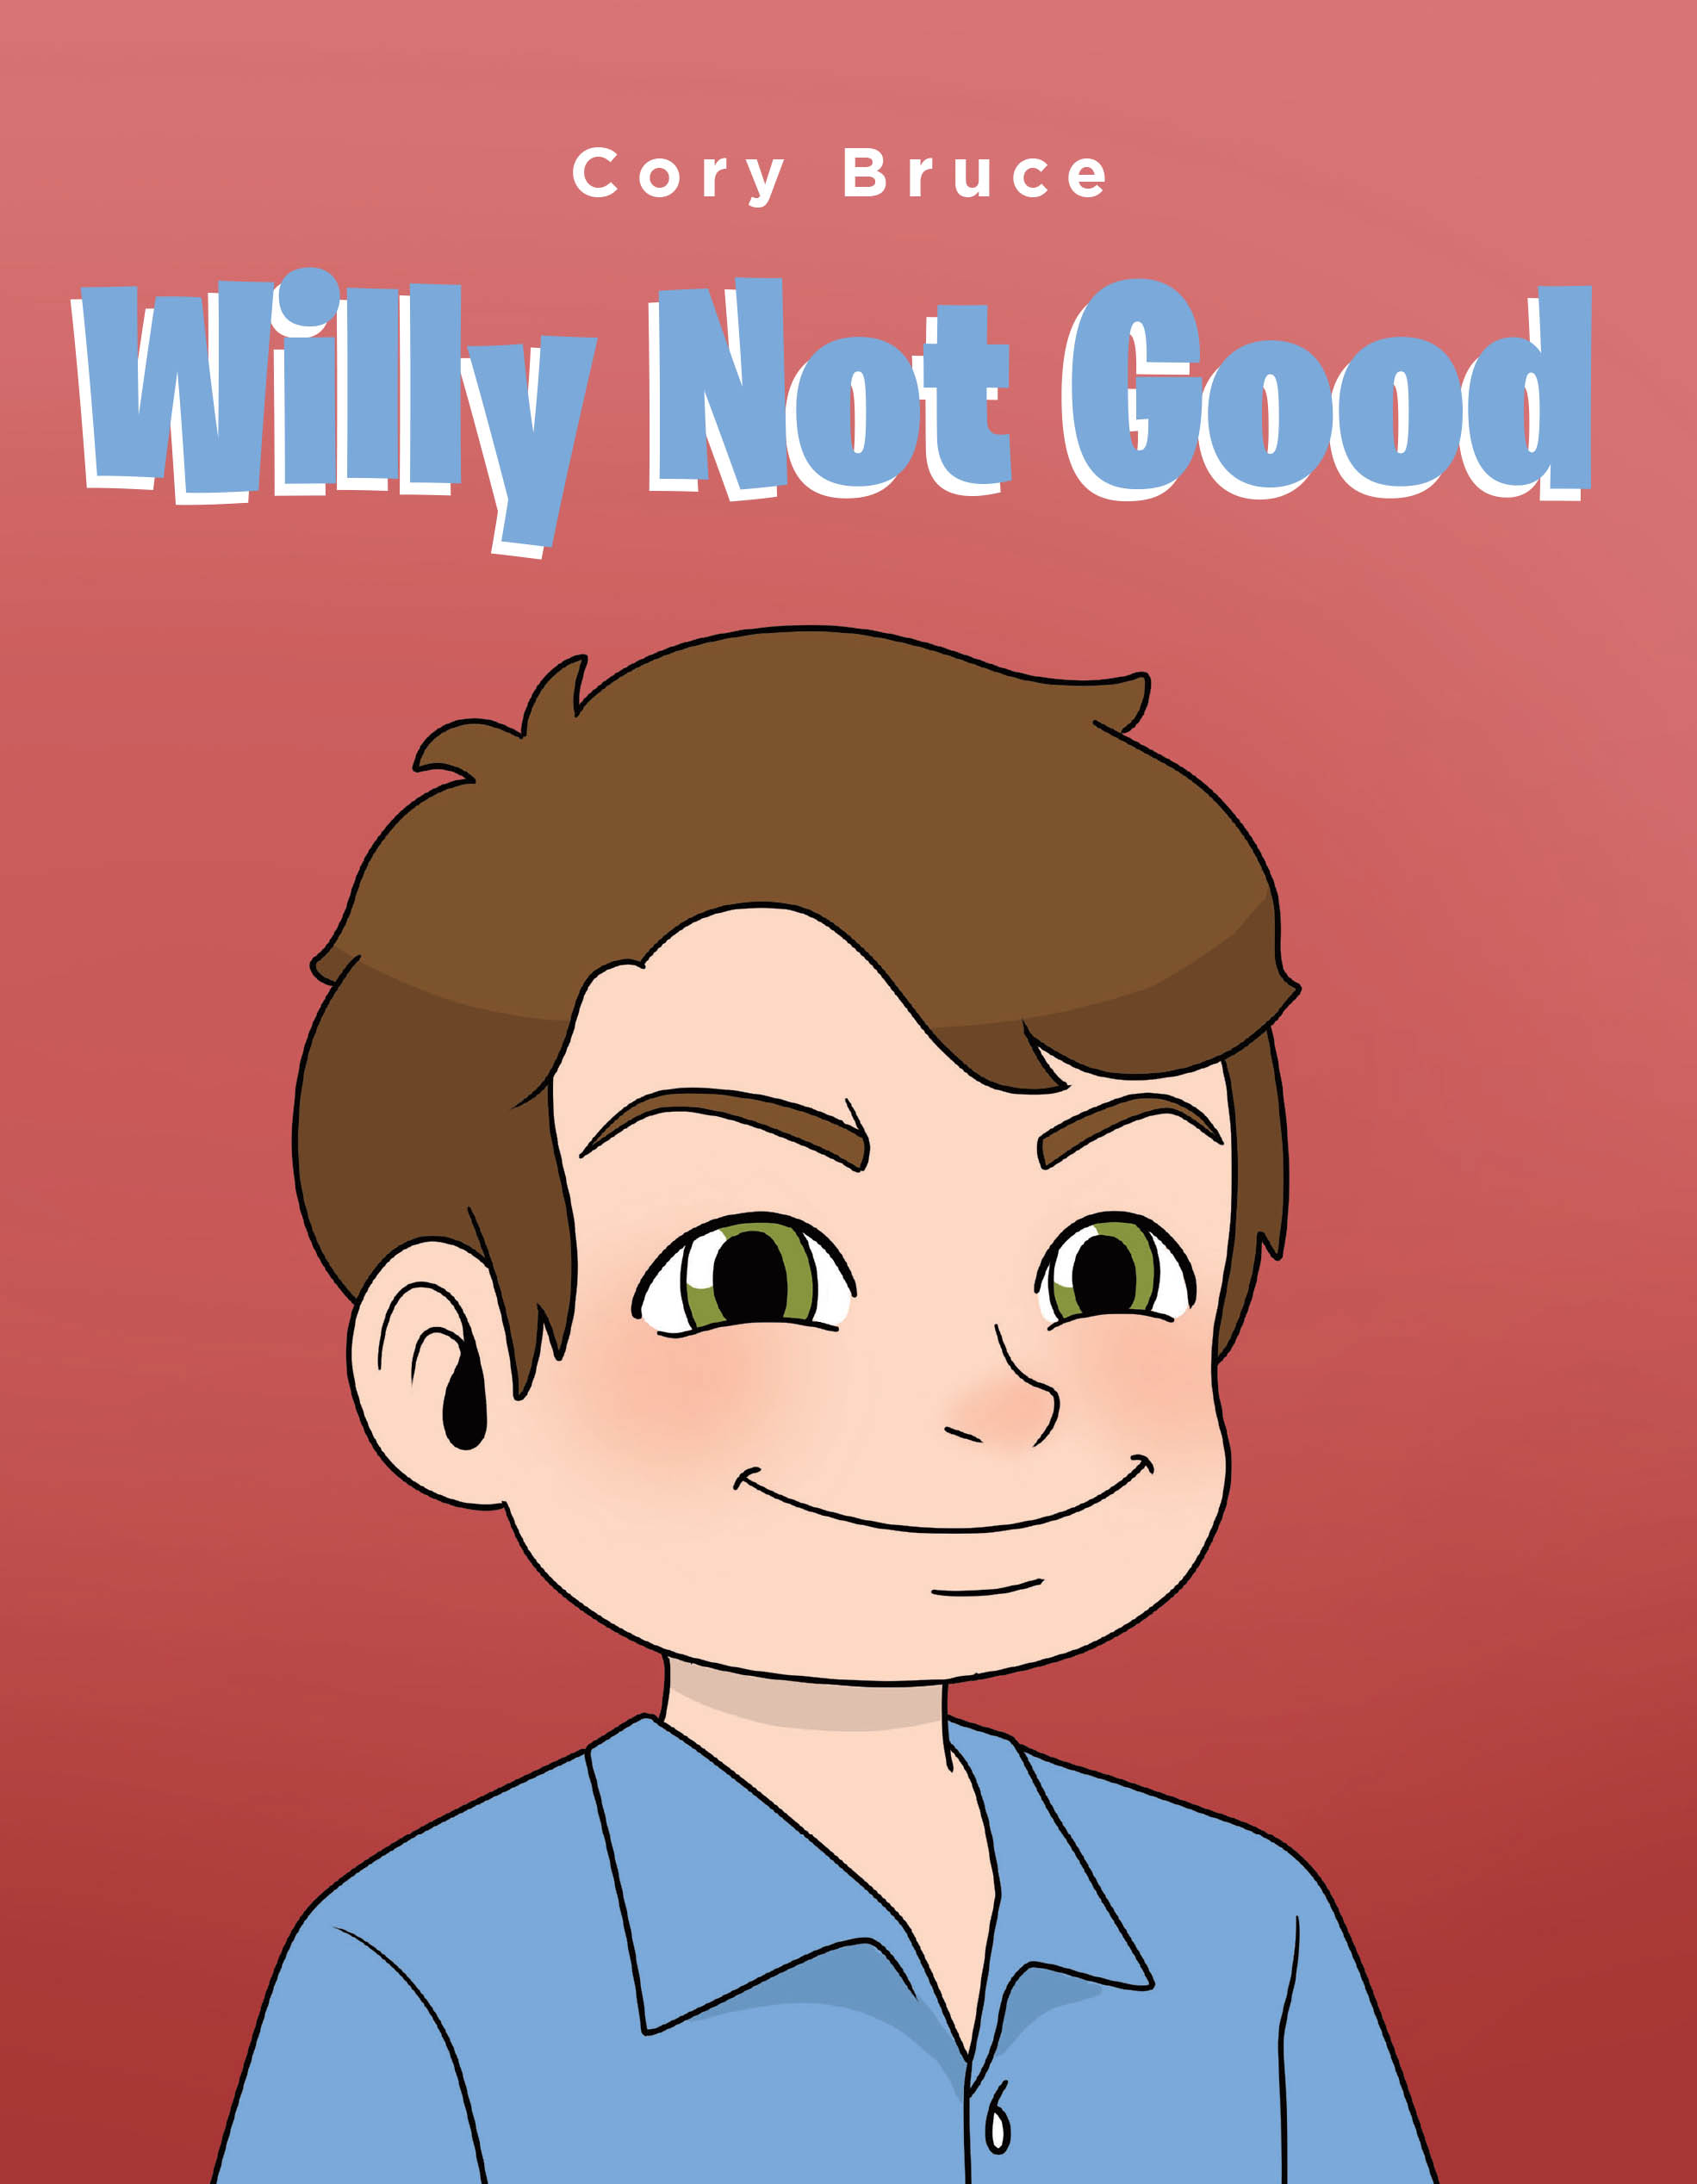 Author Cory Bruce’s New Book, "Willy Not Good," is a Captivating Story of a Boy Named Willy Who Never Listens to His Parents, Causing Trouble at Every Turn